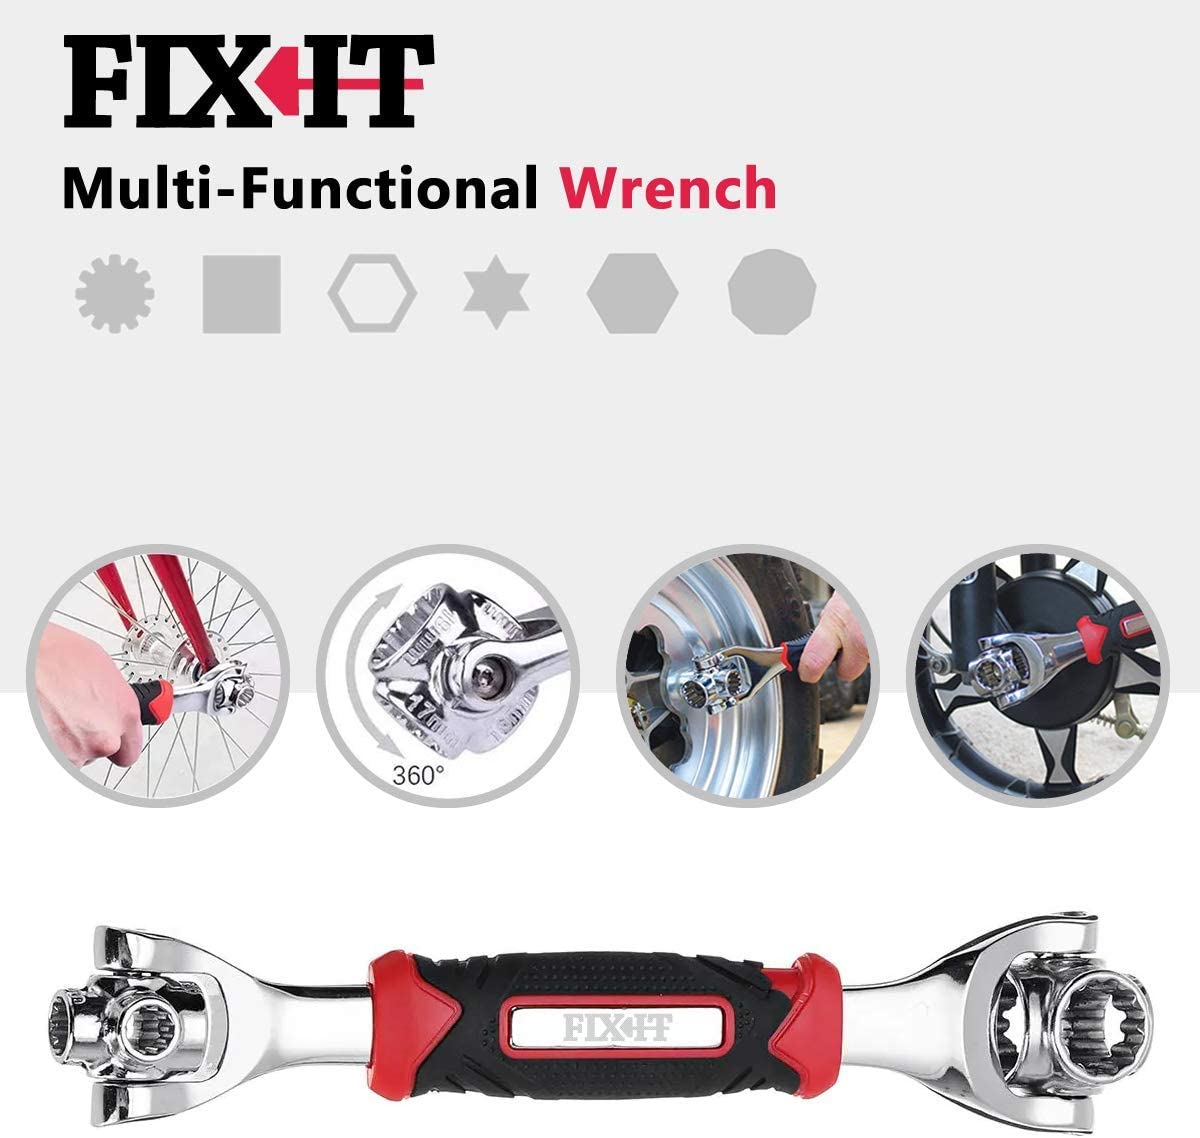 Universal Socket Wrench - 48 in 1 Multi function Socket Wrench Tool